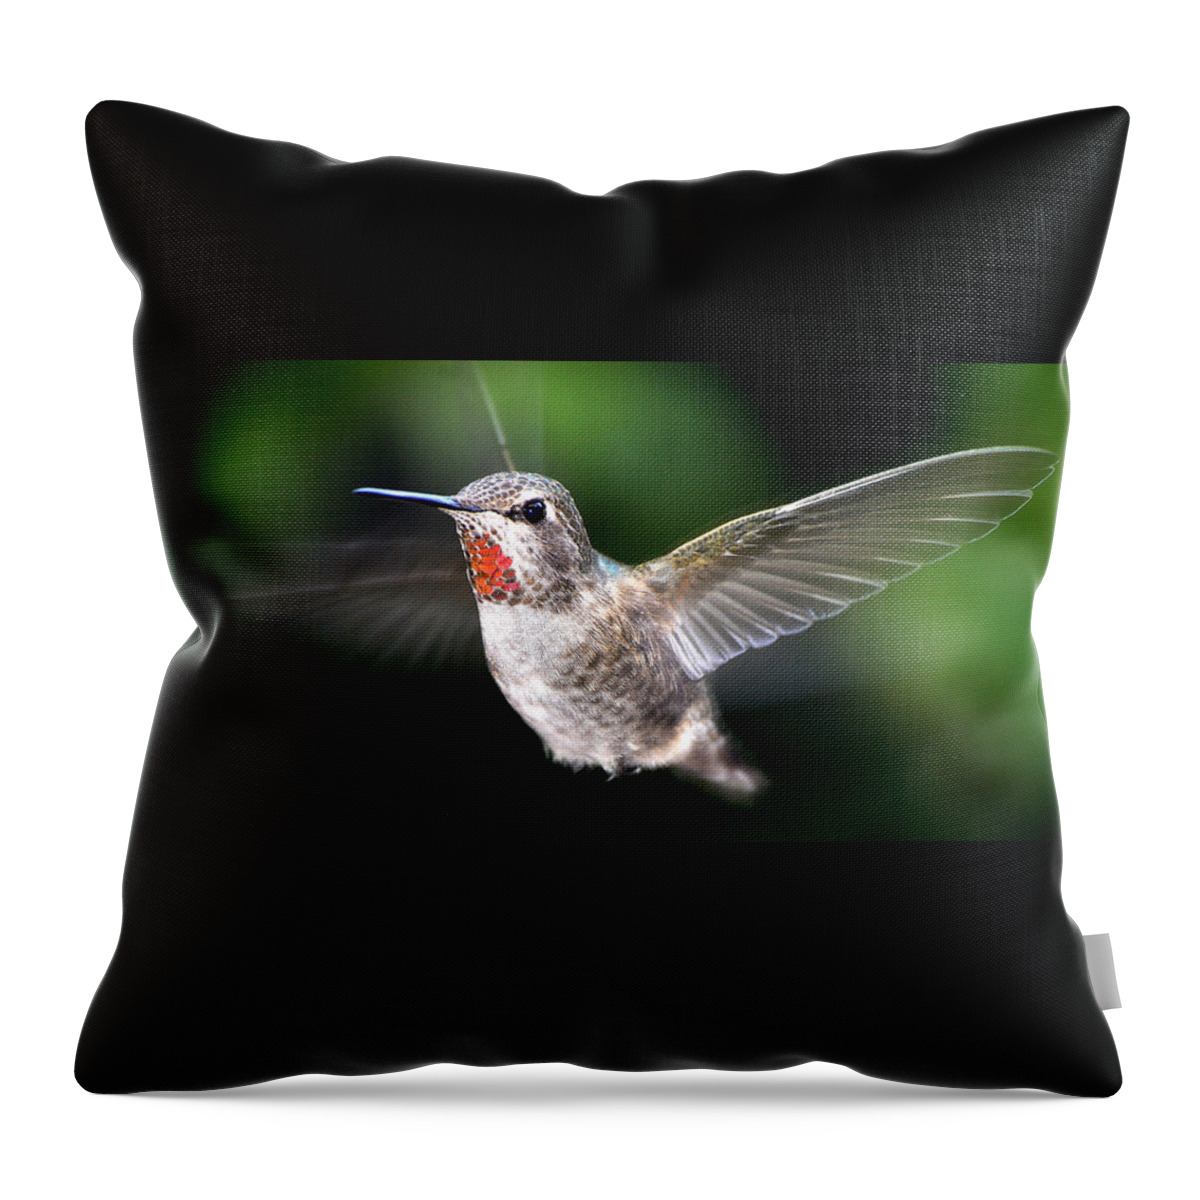 Hummingbird Throw Pillow featuring the photograph Female Caliope Hummingbird In Flight by Jay Milo